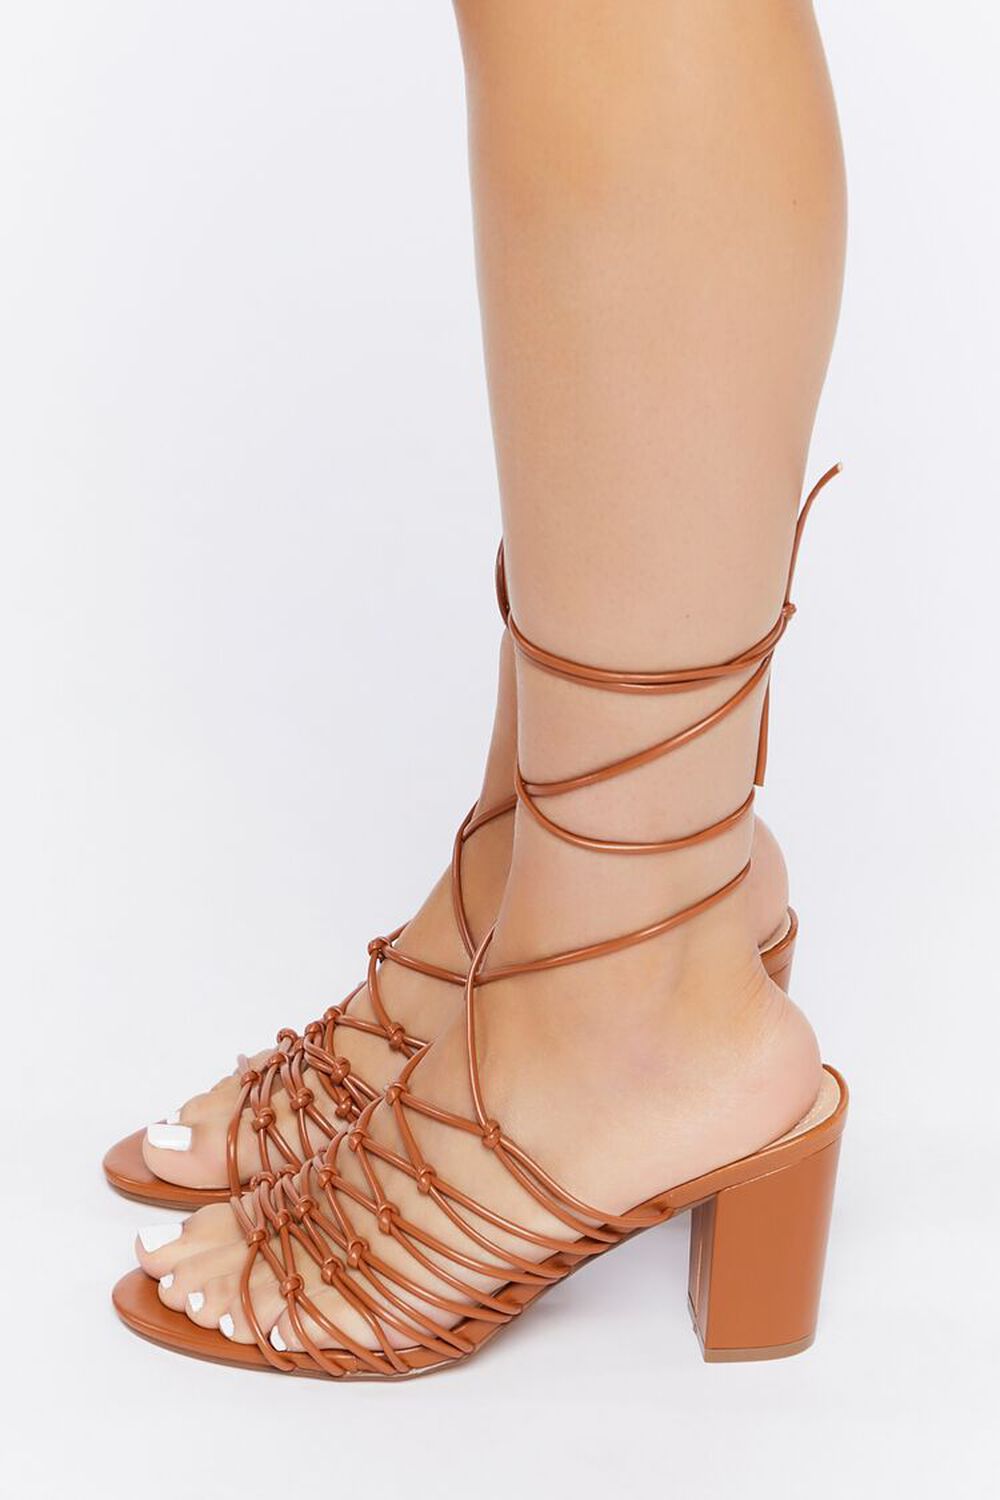 TAN Faux Leather Lace-Up Heels, image 2